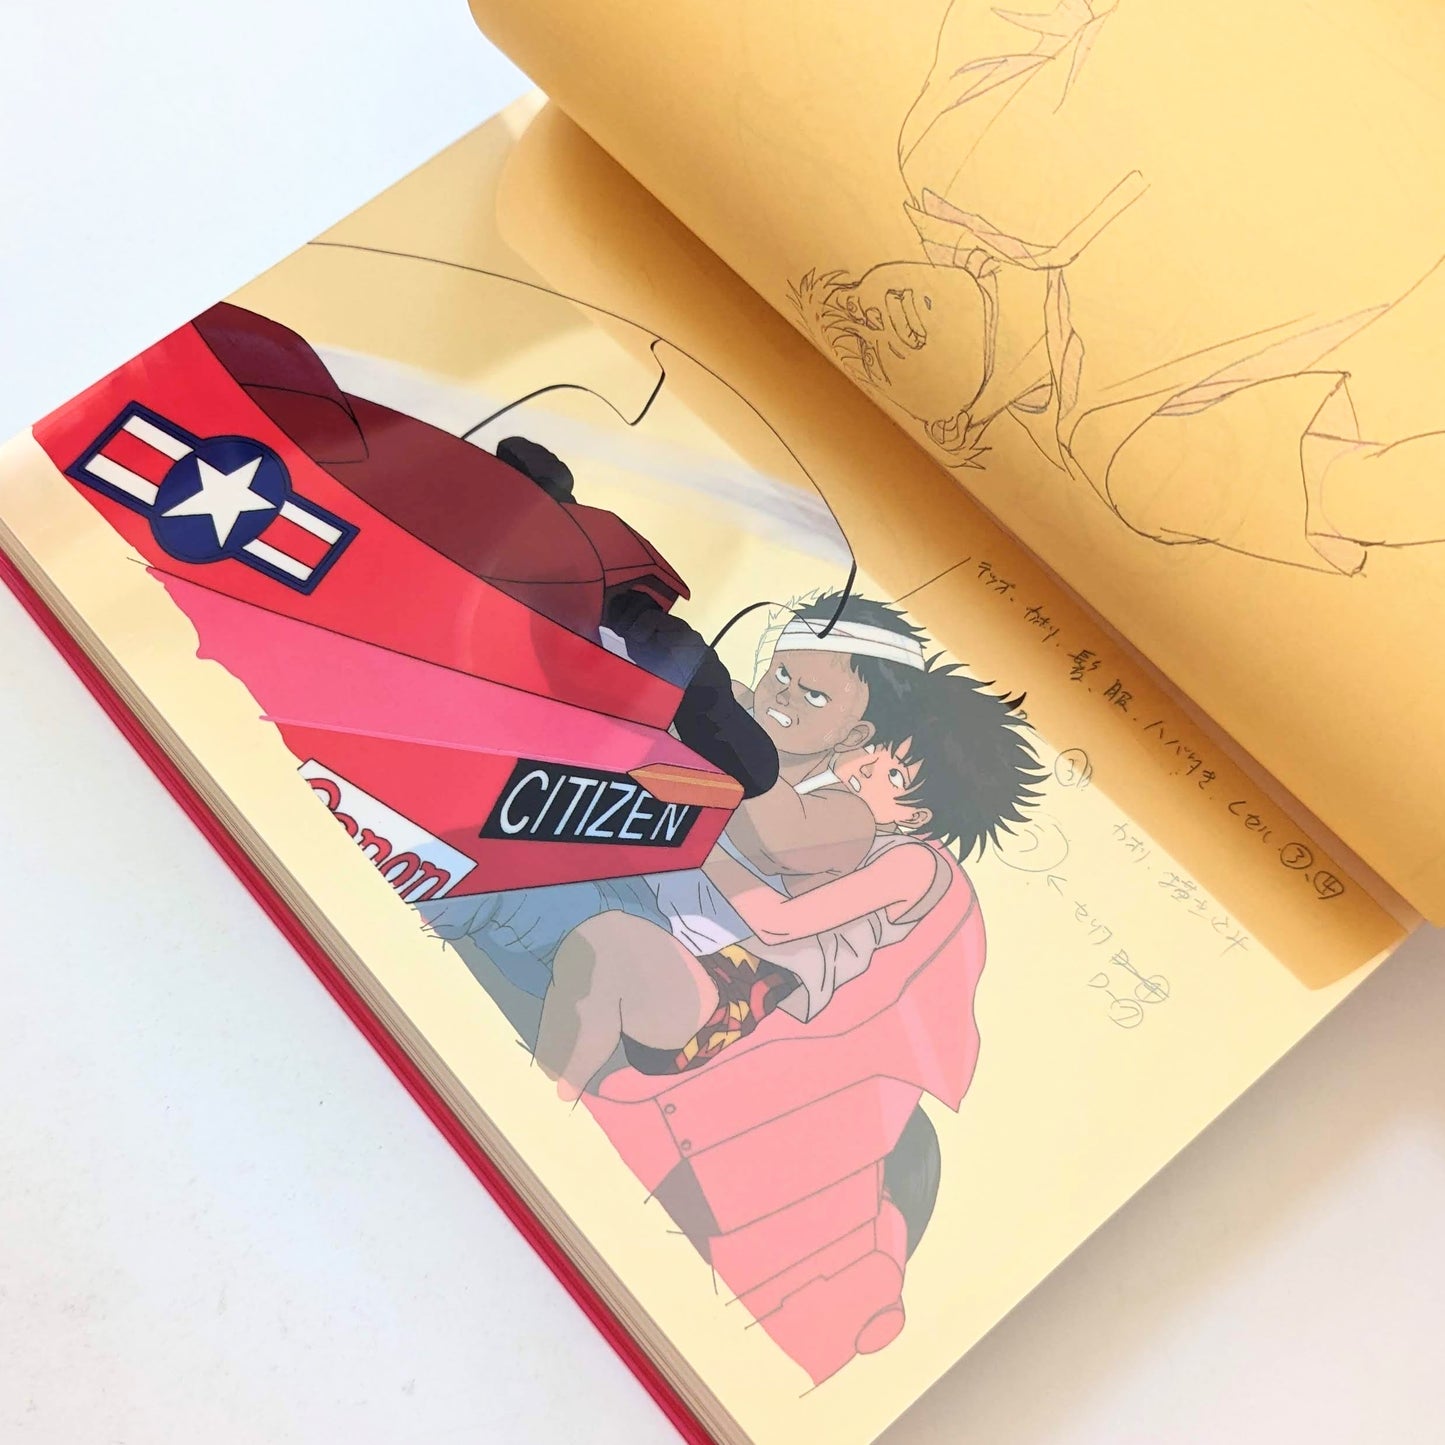 Otomo: The Complete Works No. 23: AKIRA Layouts and Key Frames 1